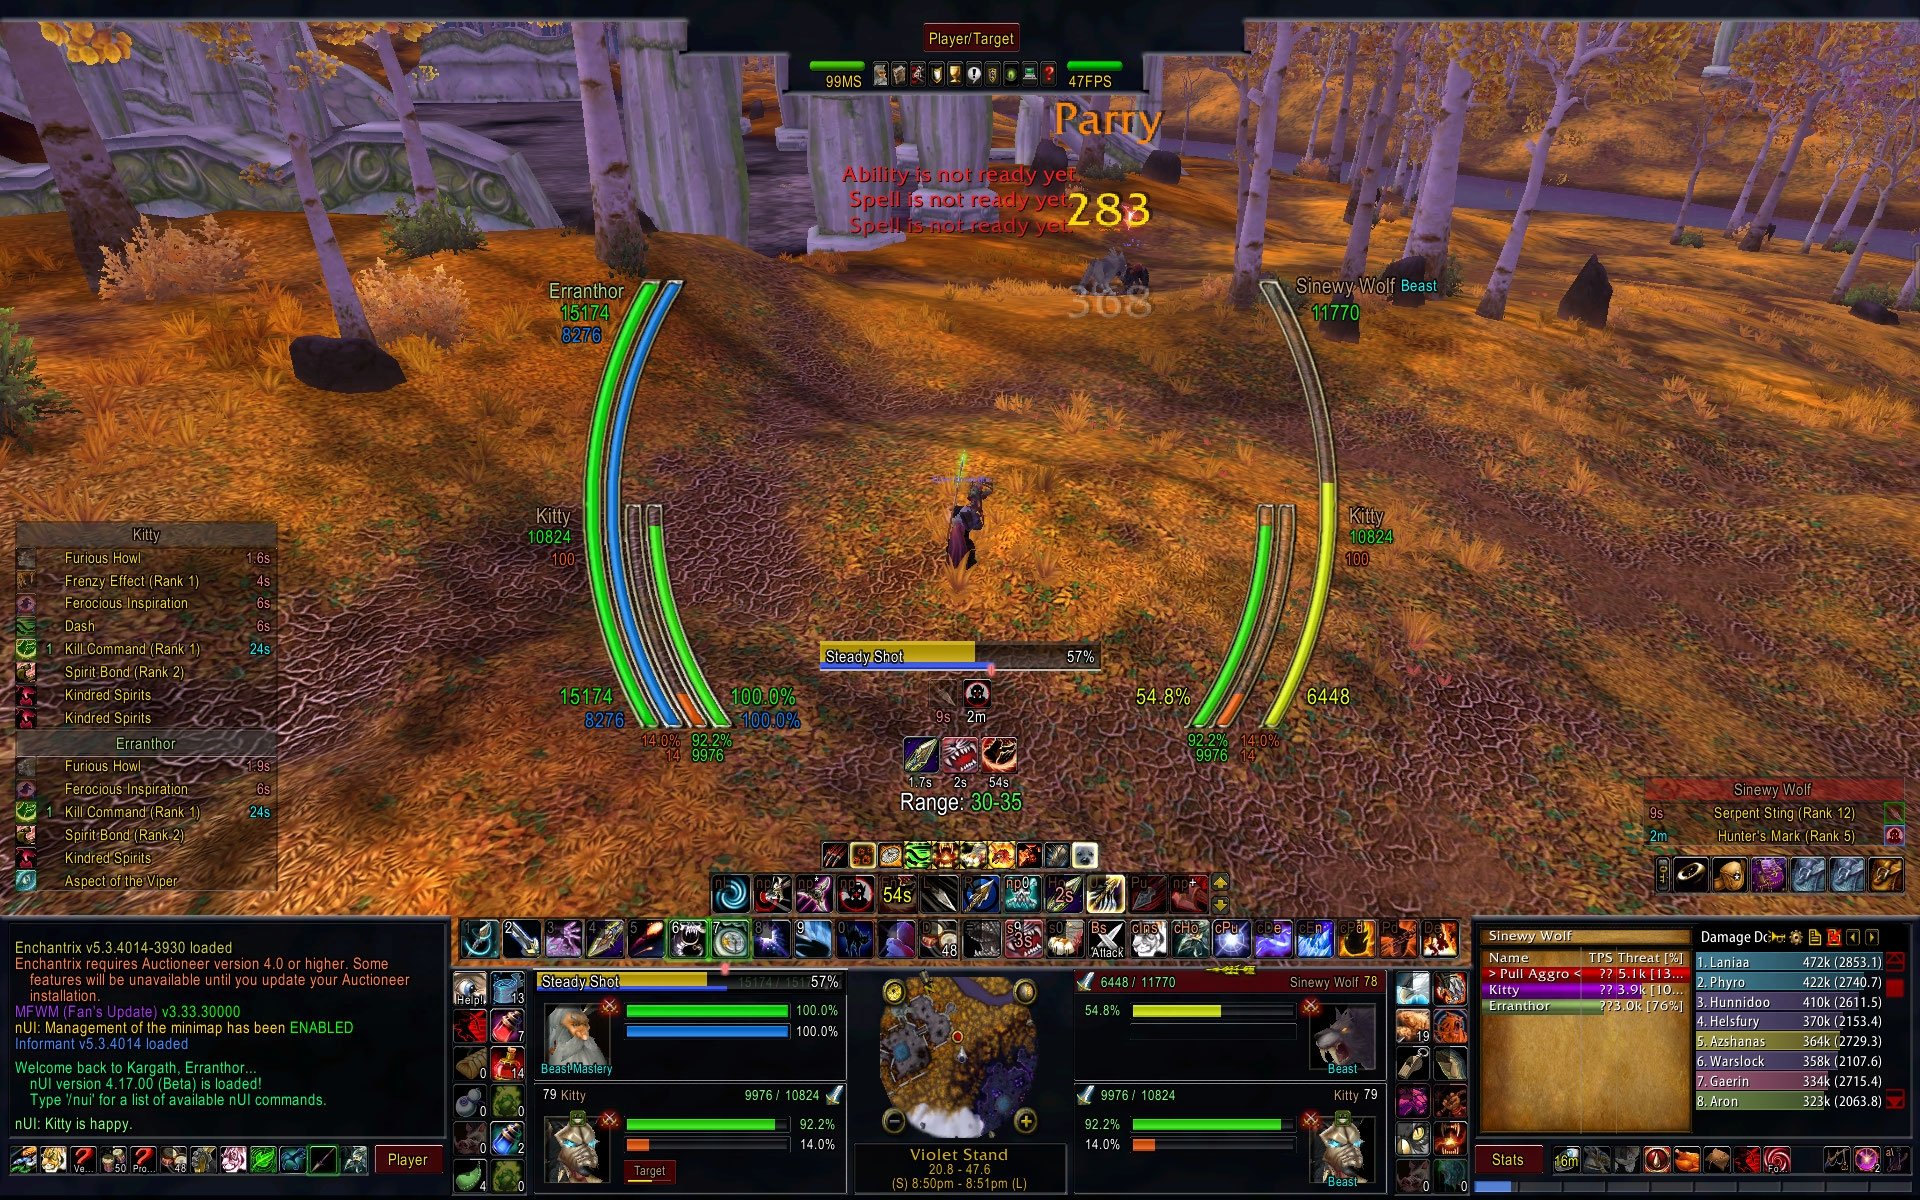 curse wow addons download free